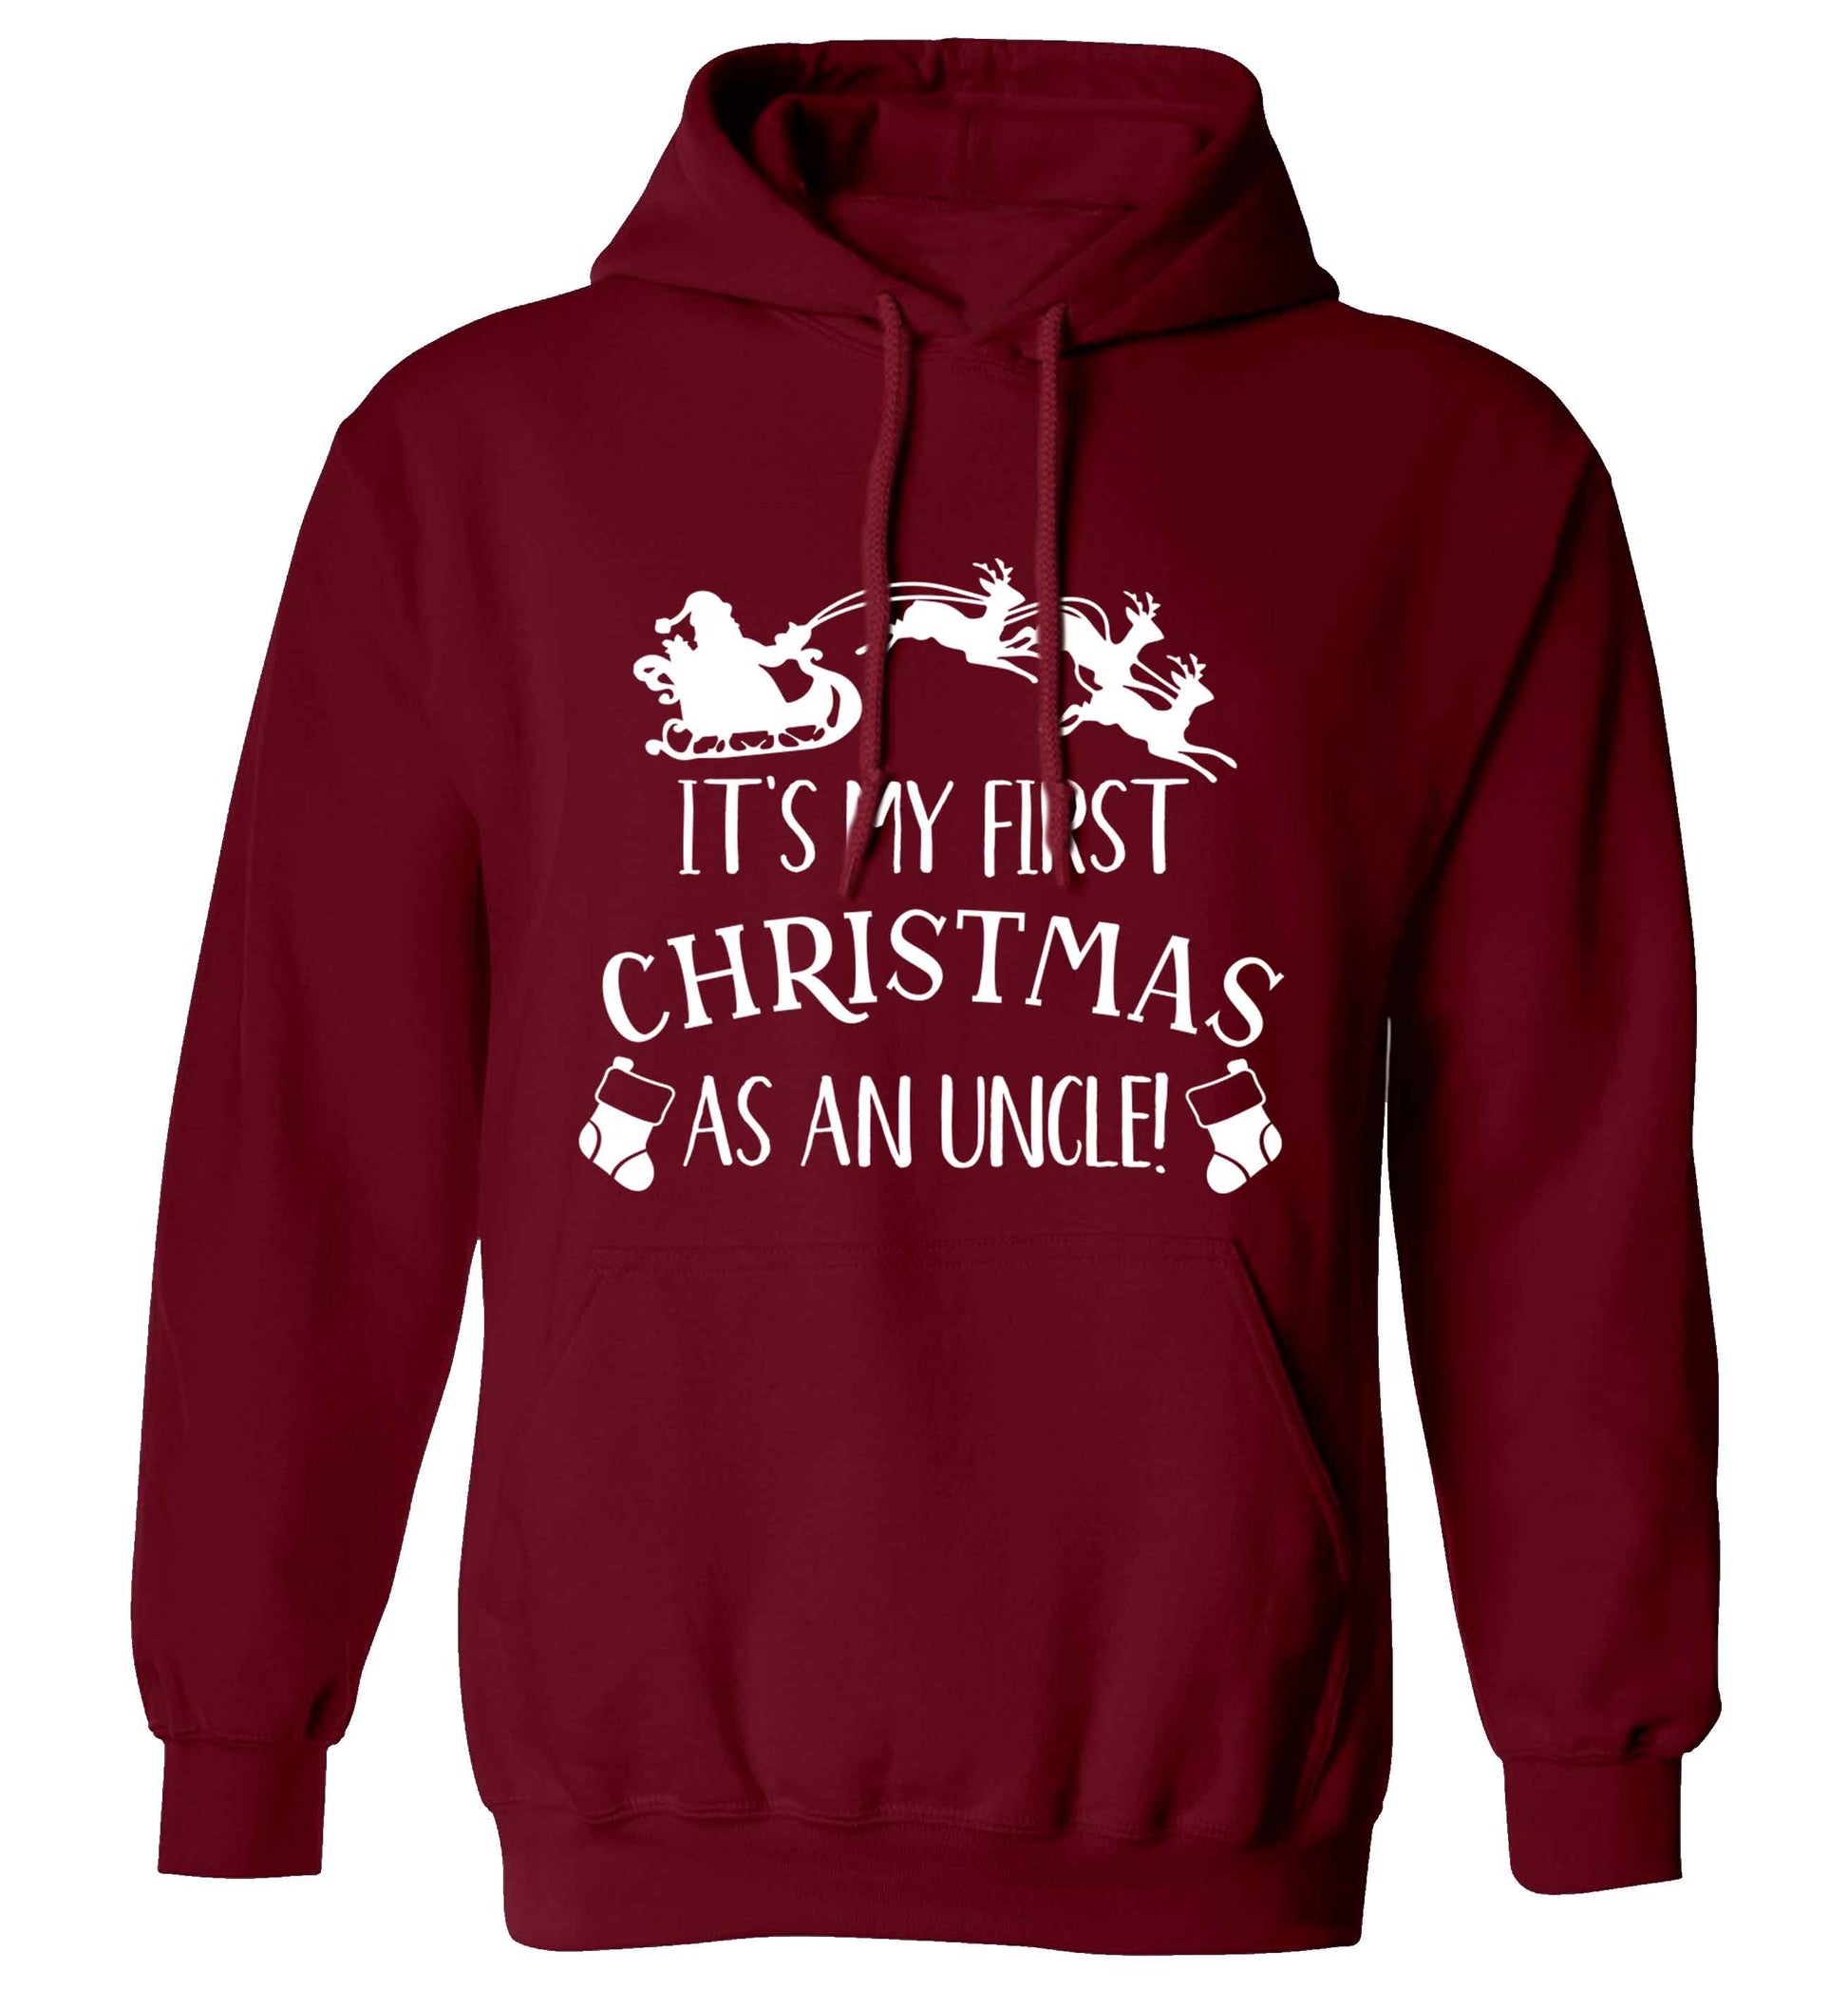 It's my first Christmas as an uncle! adults unisex maroon hoodie 2XL